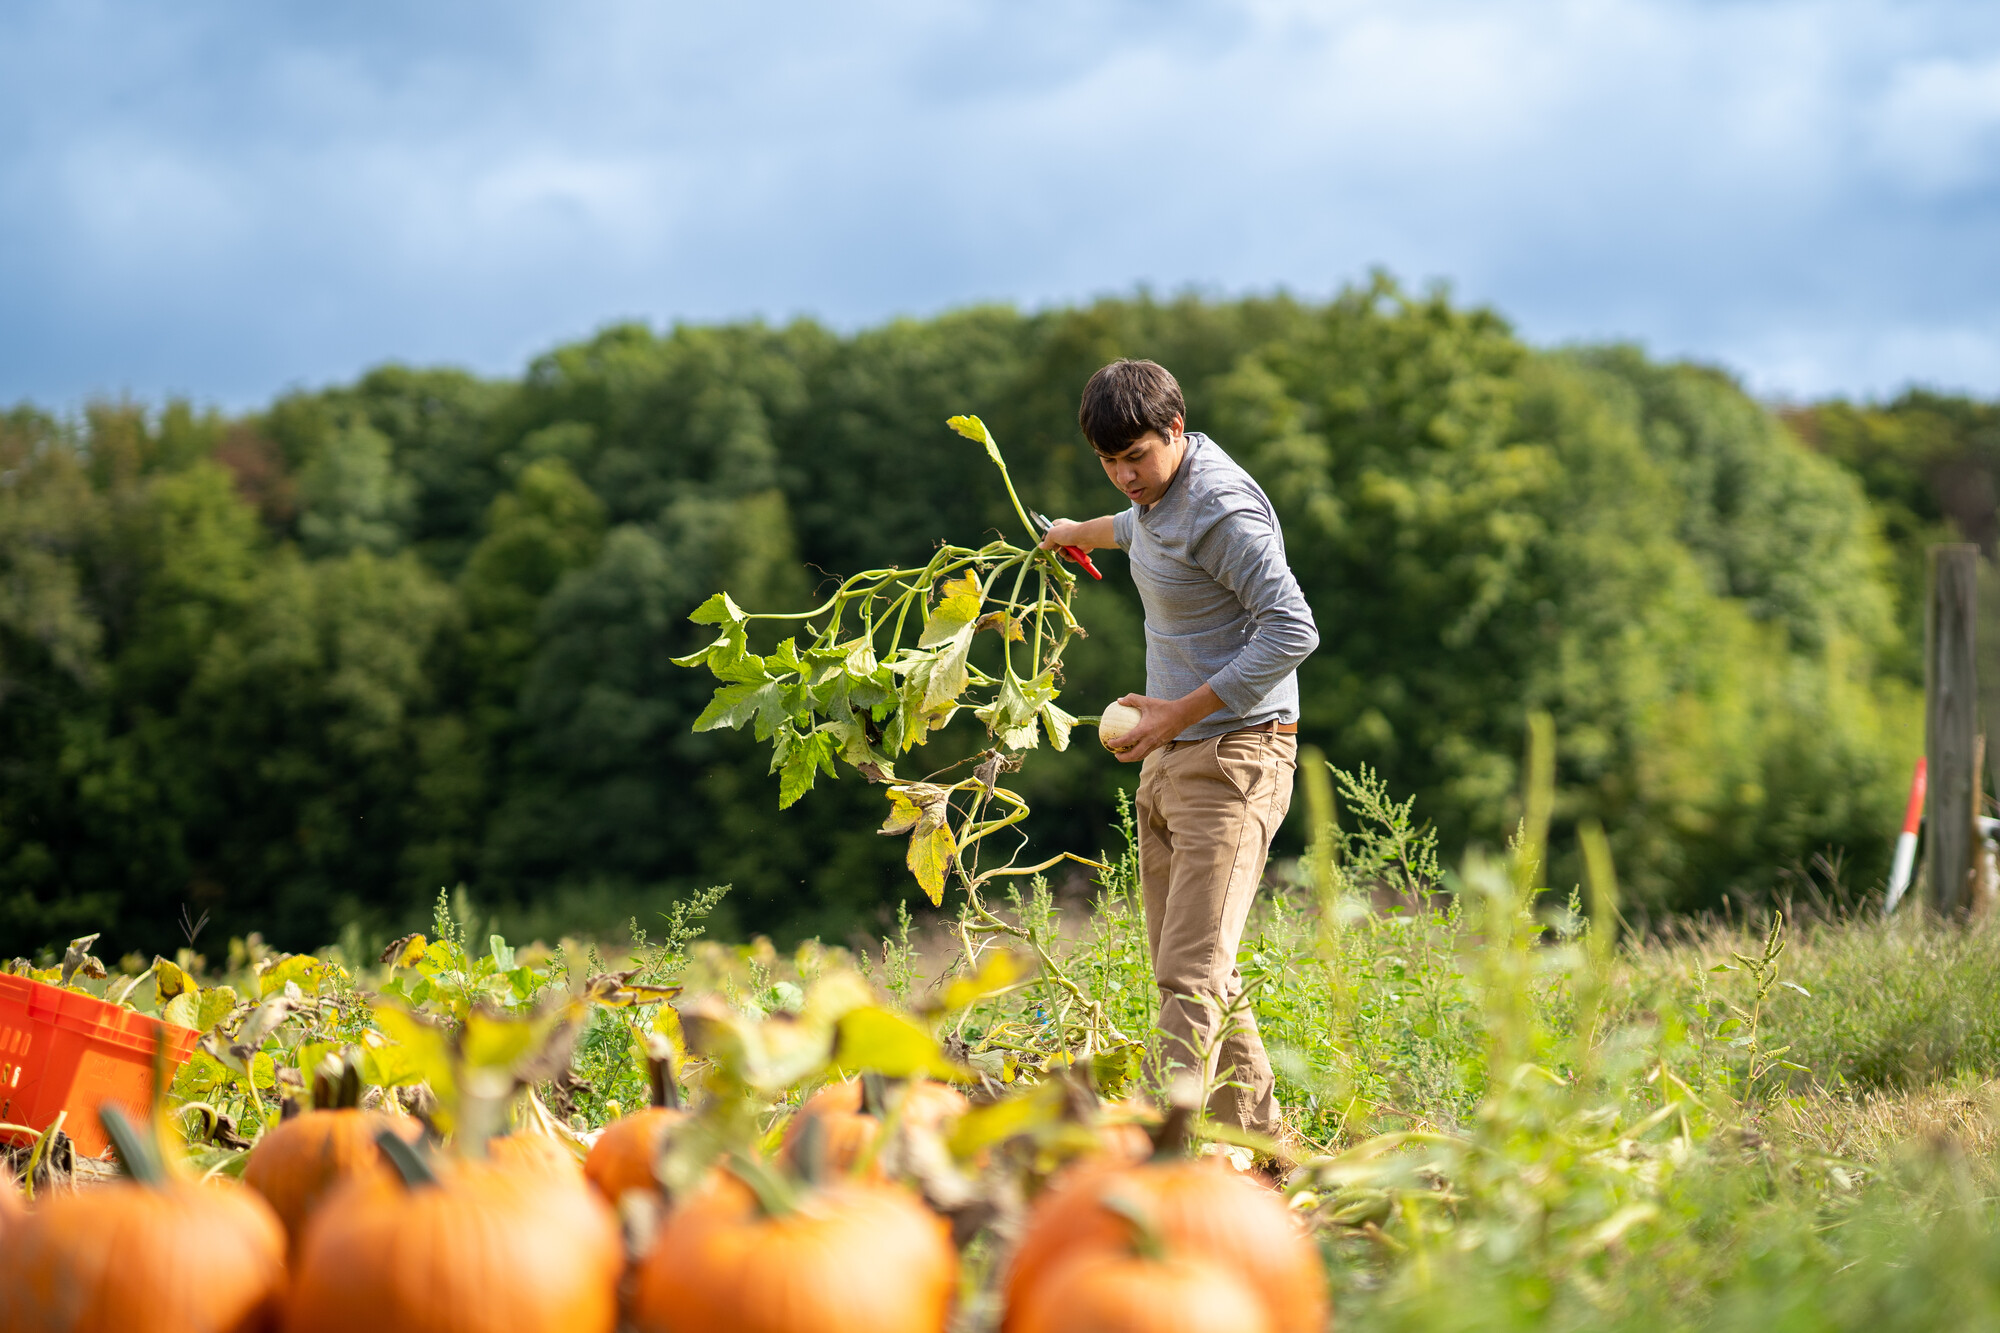 A man picking up pumpkin stems and leaves on a farm, pumpkins in the foreground